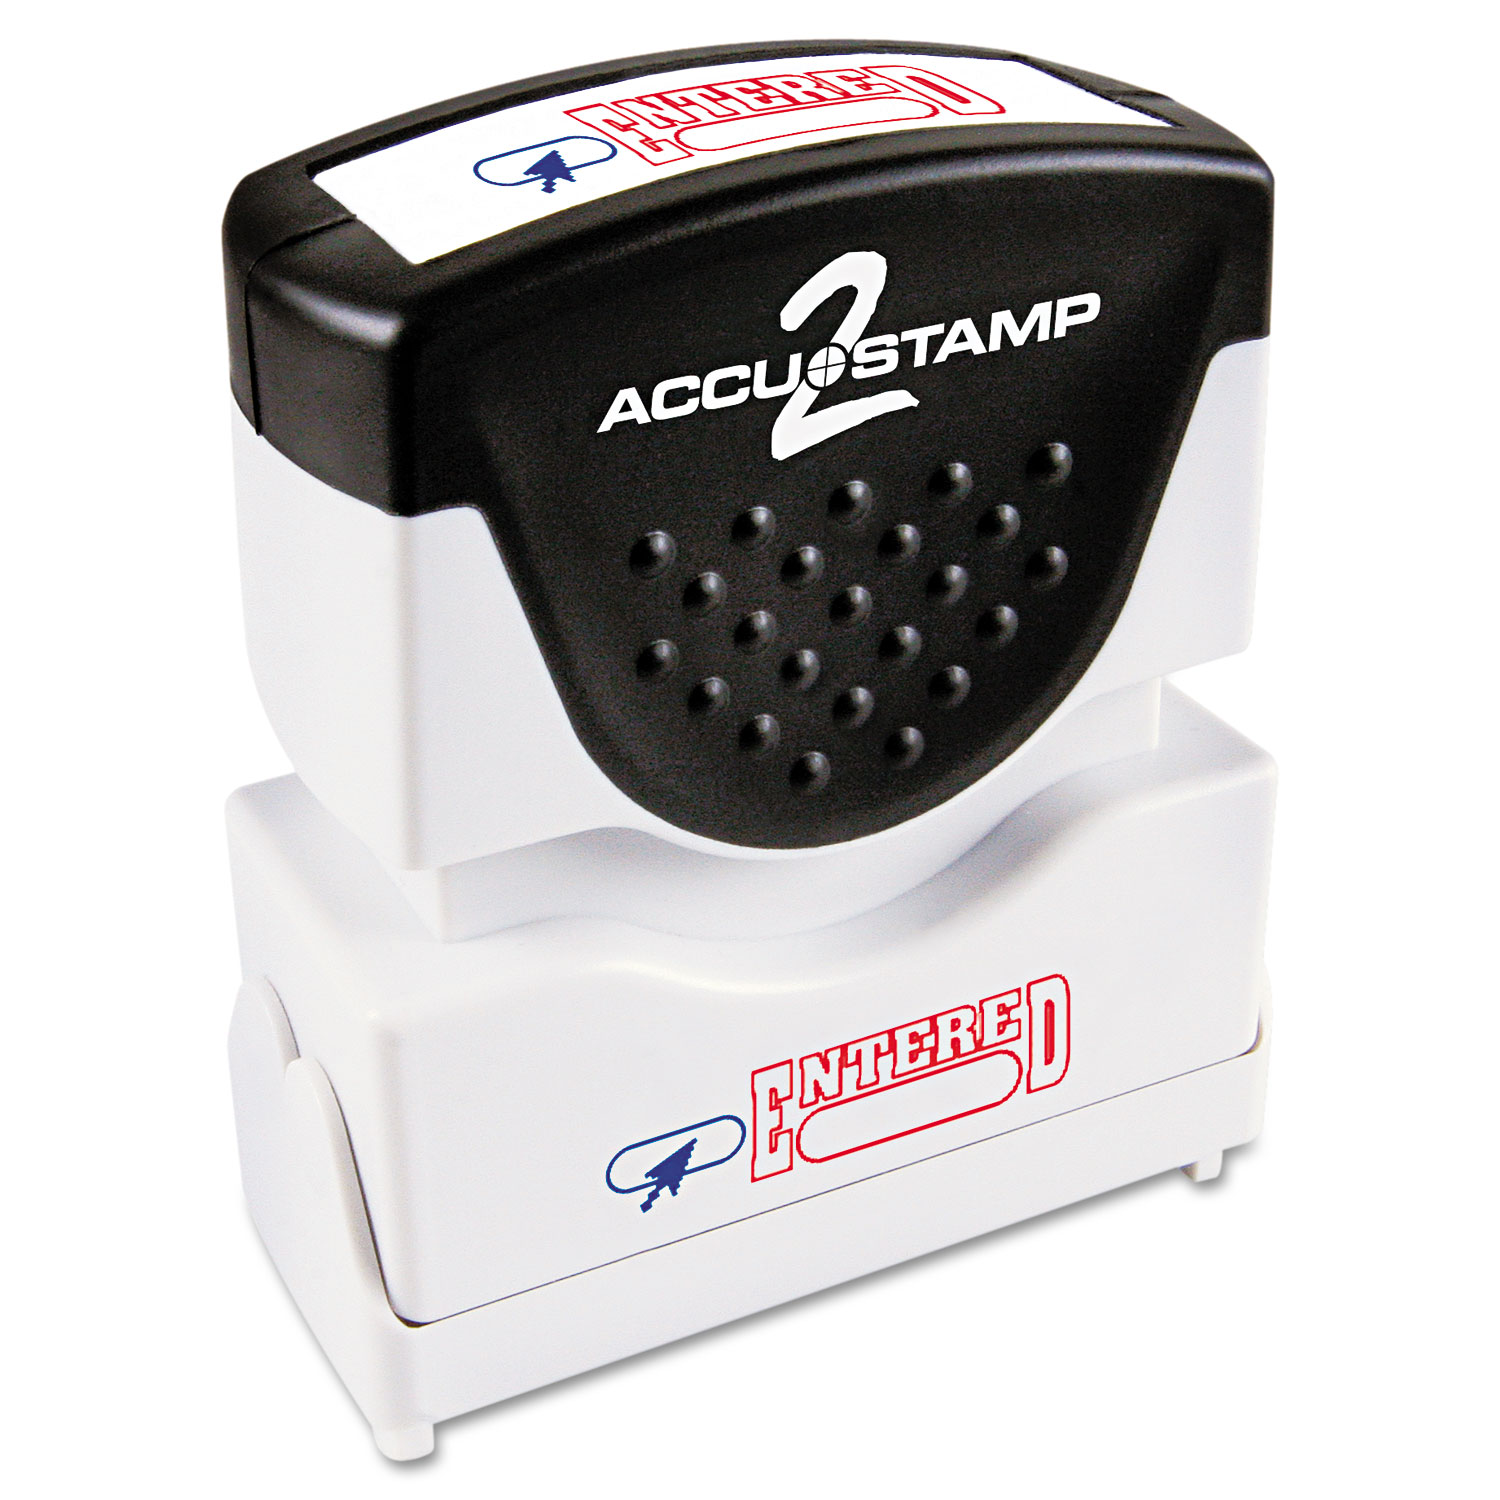  ACCUSTAMP2 035544 Pre-Inked Shutter Stamp, Red/Blue, ENTERED, 1 5/8 x 1/2 (COS035544) 